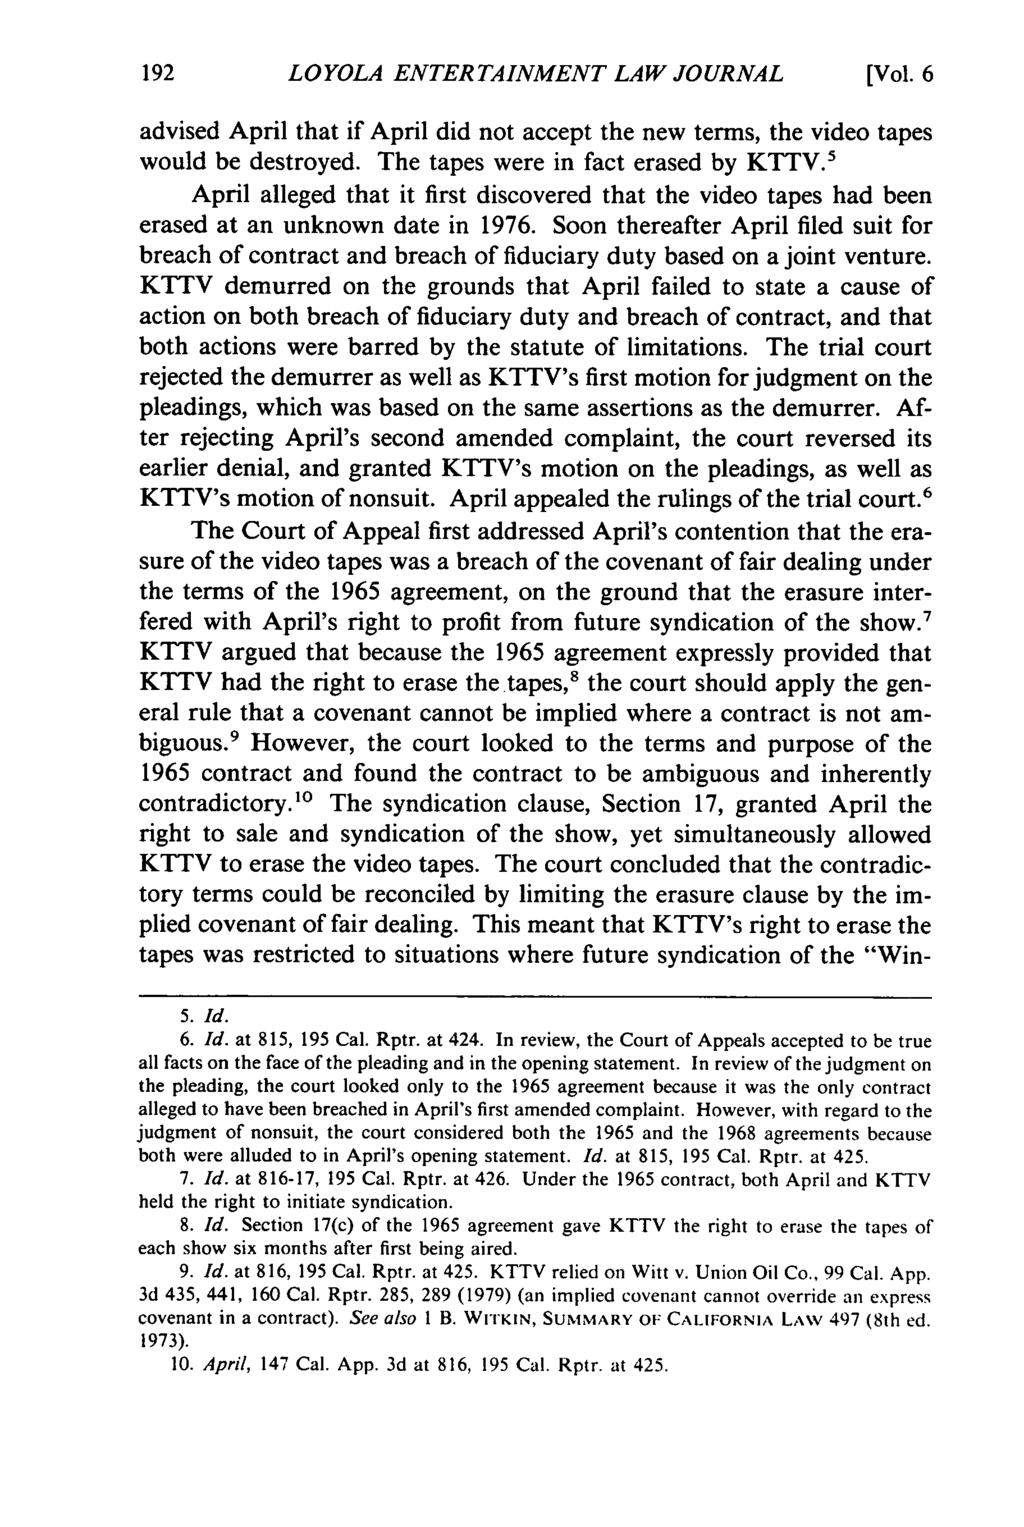 LO YOLA ENTERTAINMENT LAW JOURNAL [Vol. 6 advised April that if April did not accept the new terms, the video tapes would be destroyed. The tapes were in fact erased by KTTV.